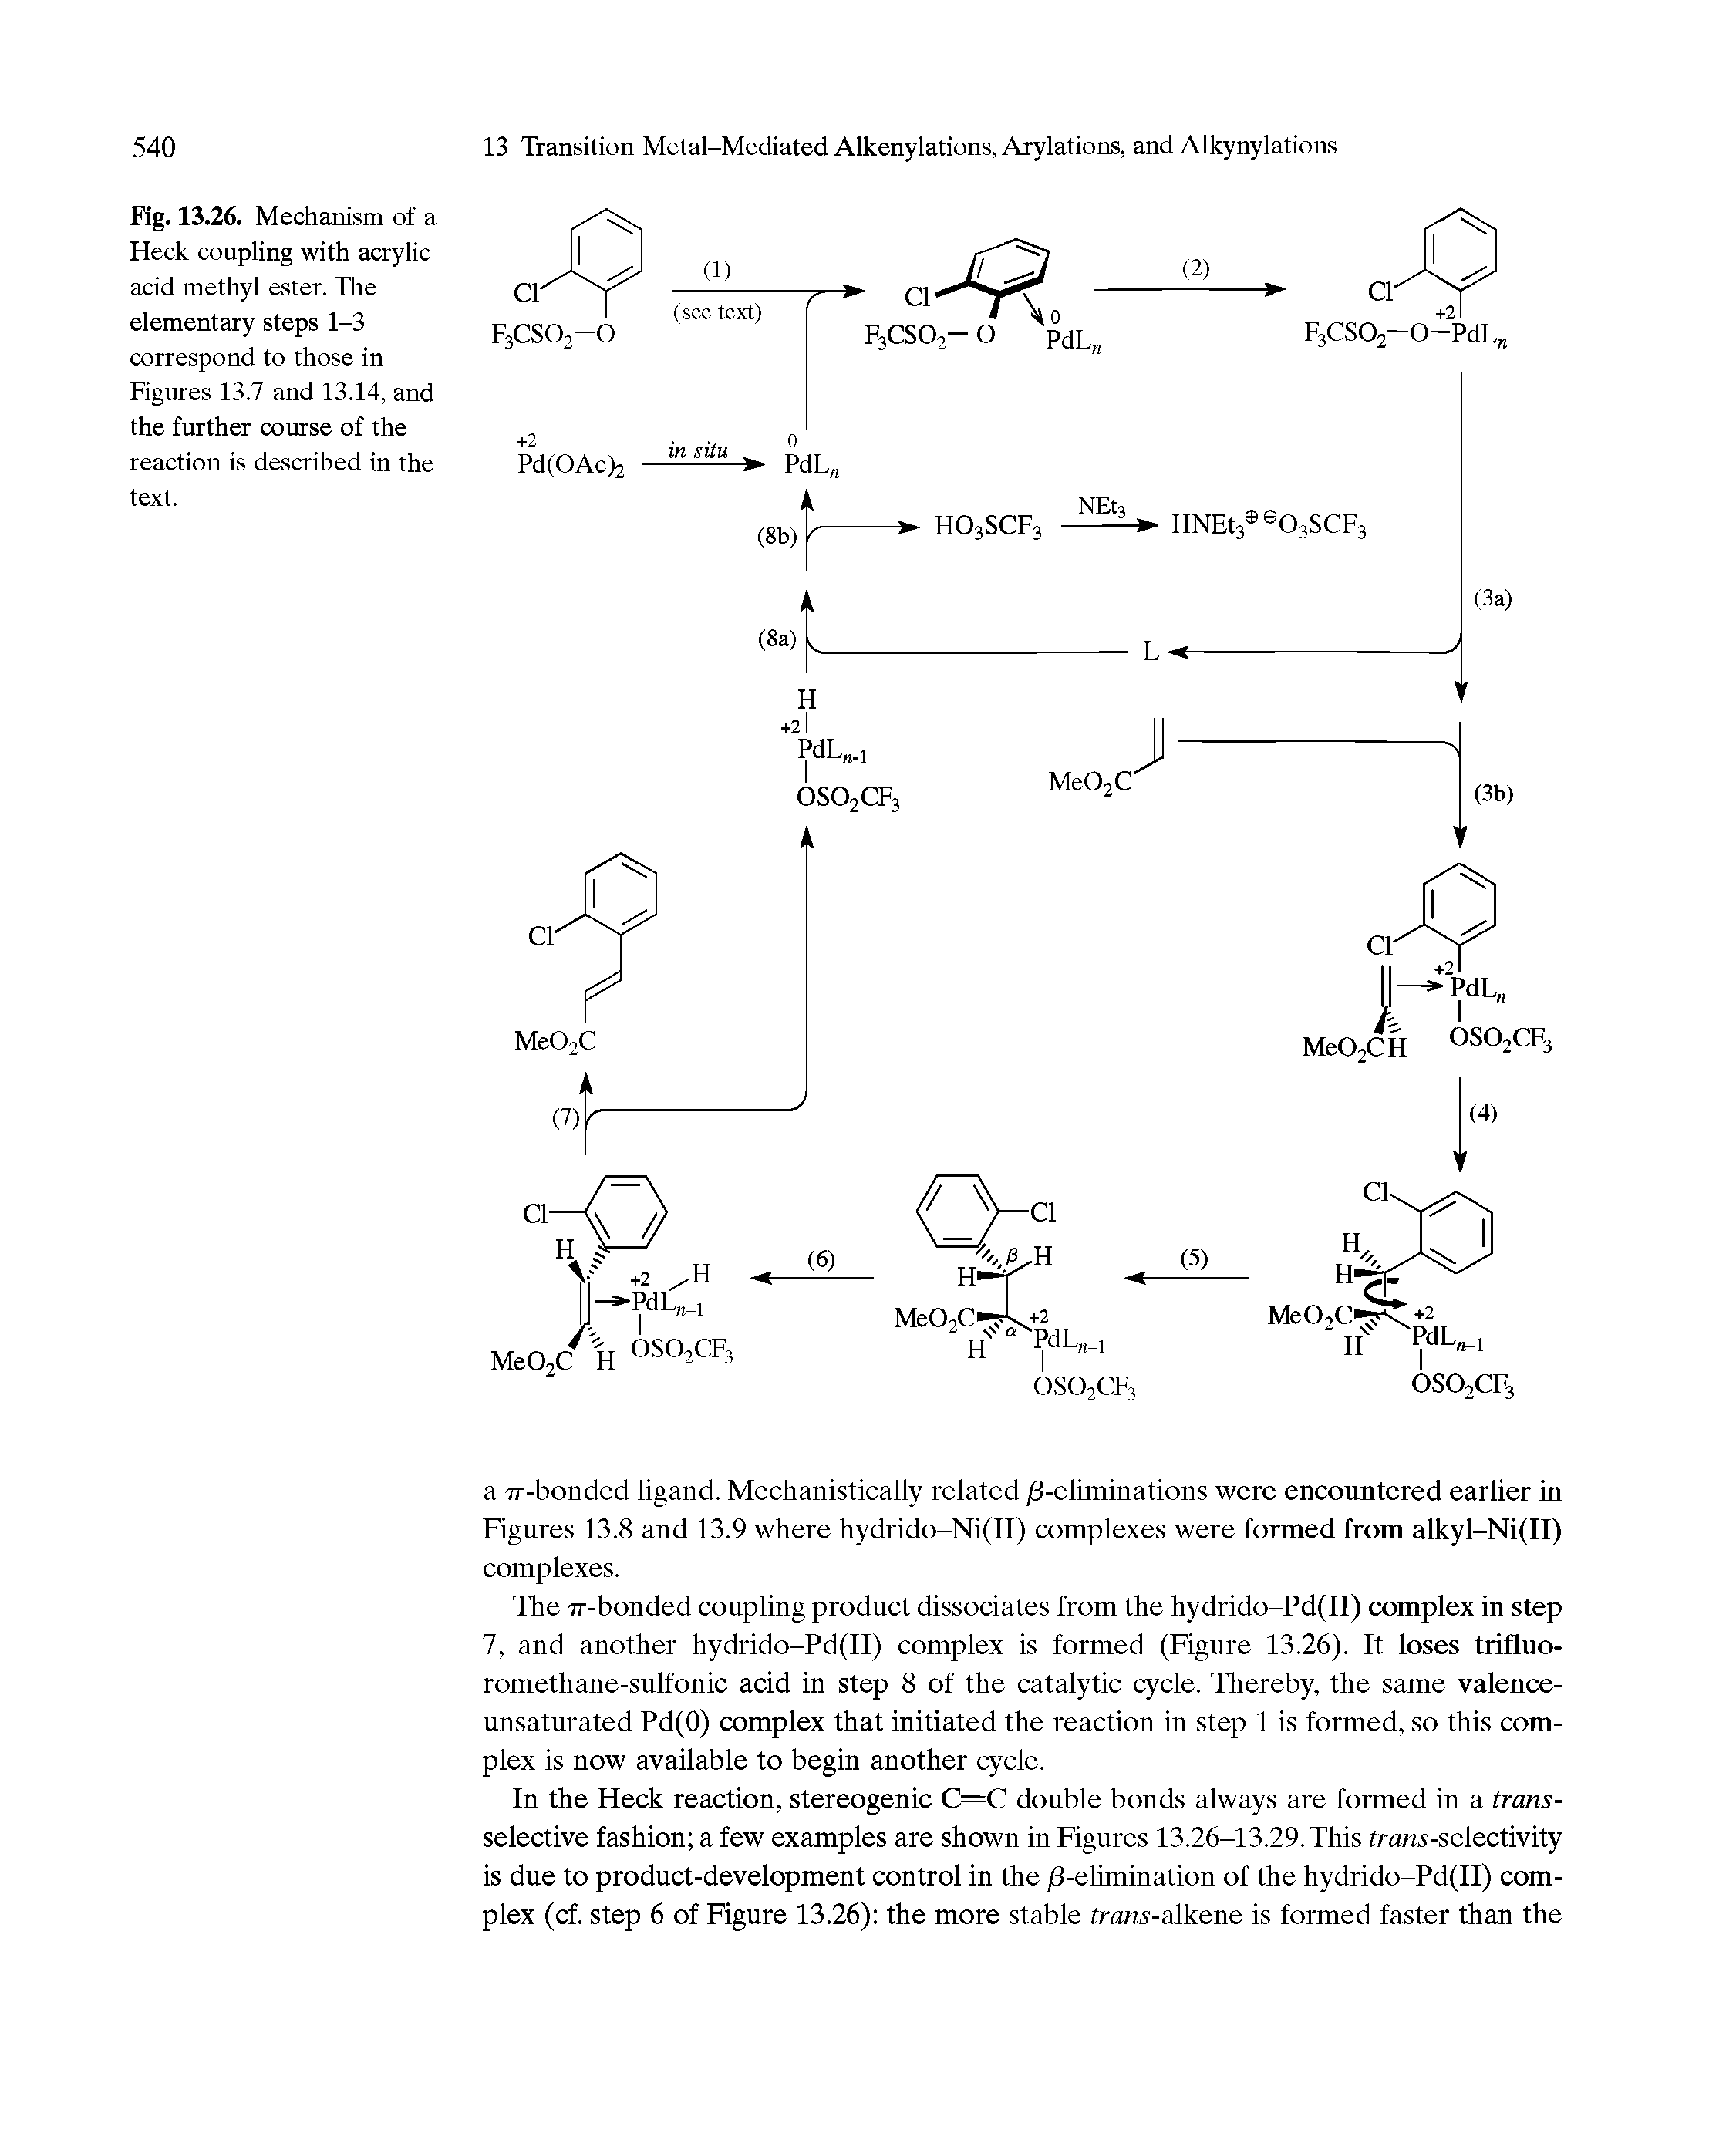 Fig. 13.26. Mechanism of a Heck coupling with acrylic acid methyl ester. The elementary steps 1-3 correspond to those in Figures 13.7 and 13.14, and the further course of the reaction is described in the text.